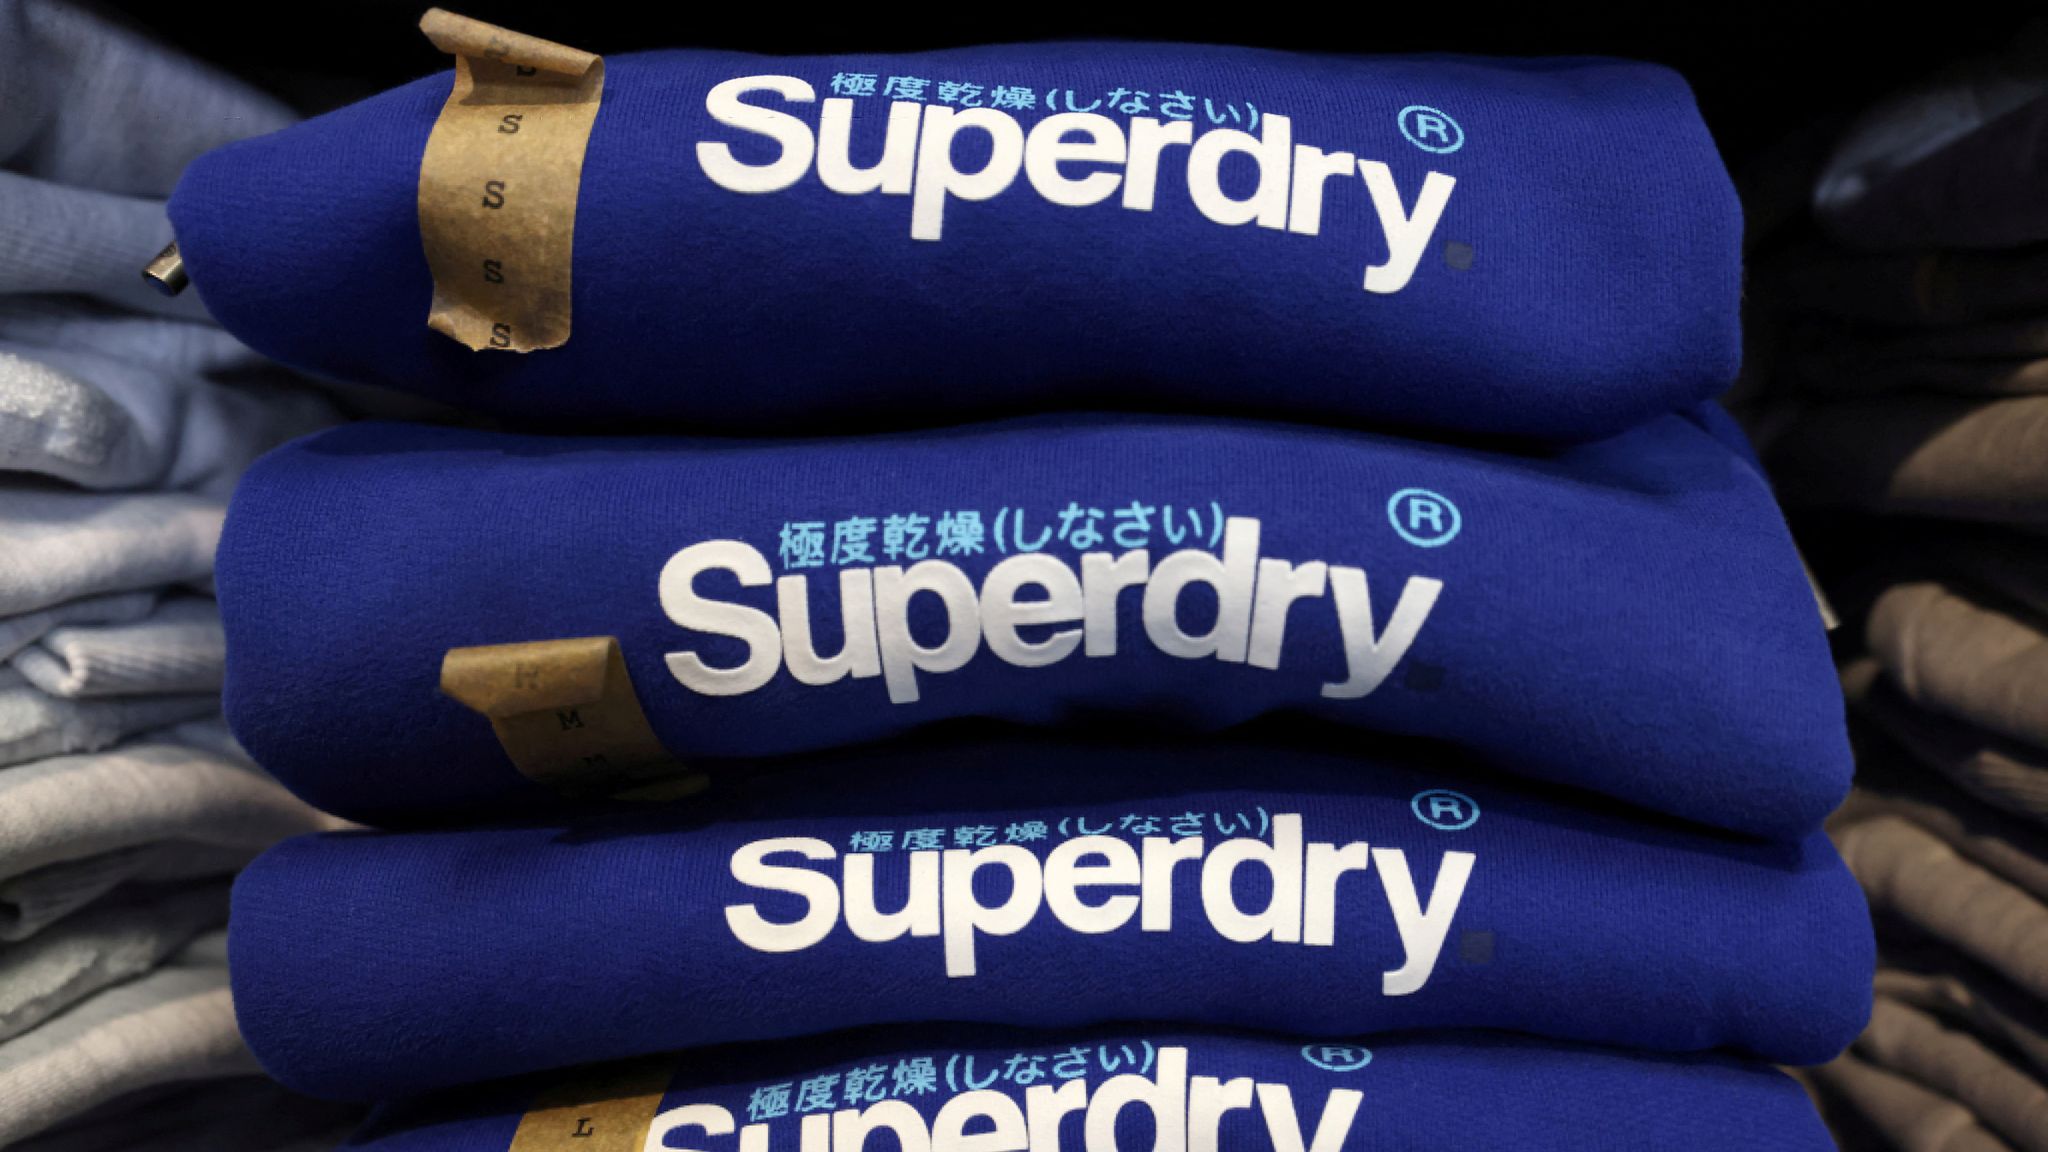 Fears for future of 'super soggy' Superdry as shares slump to